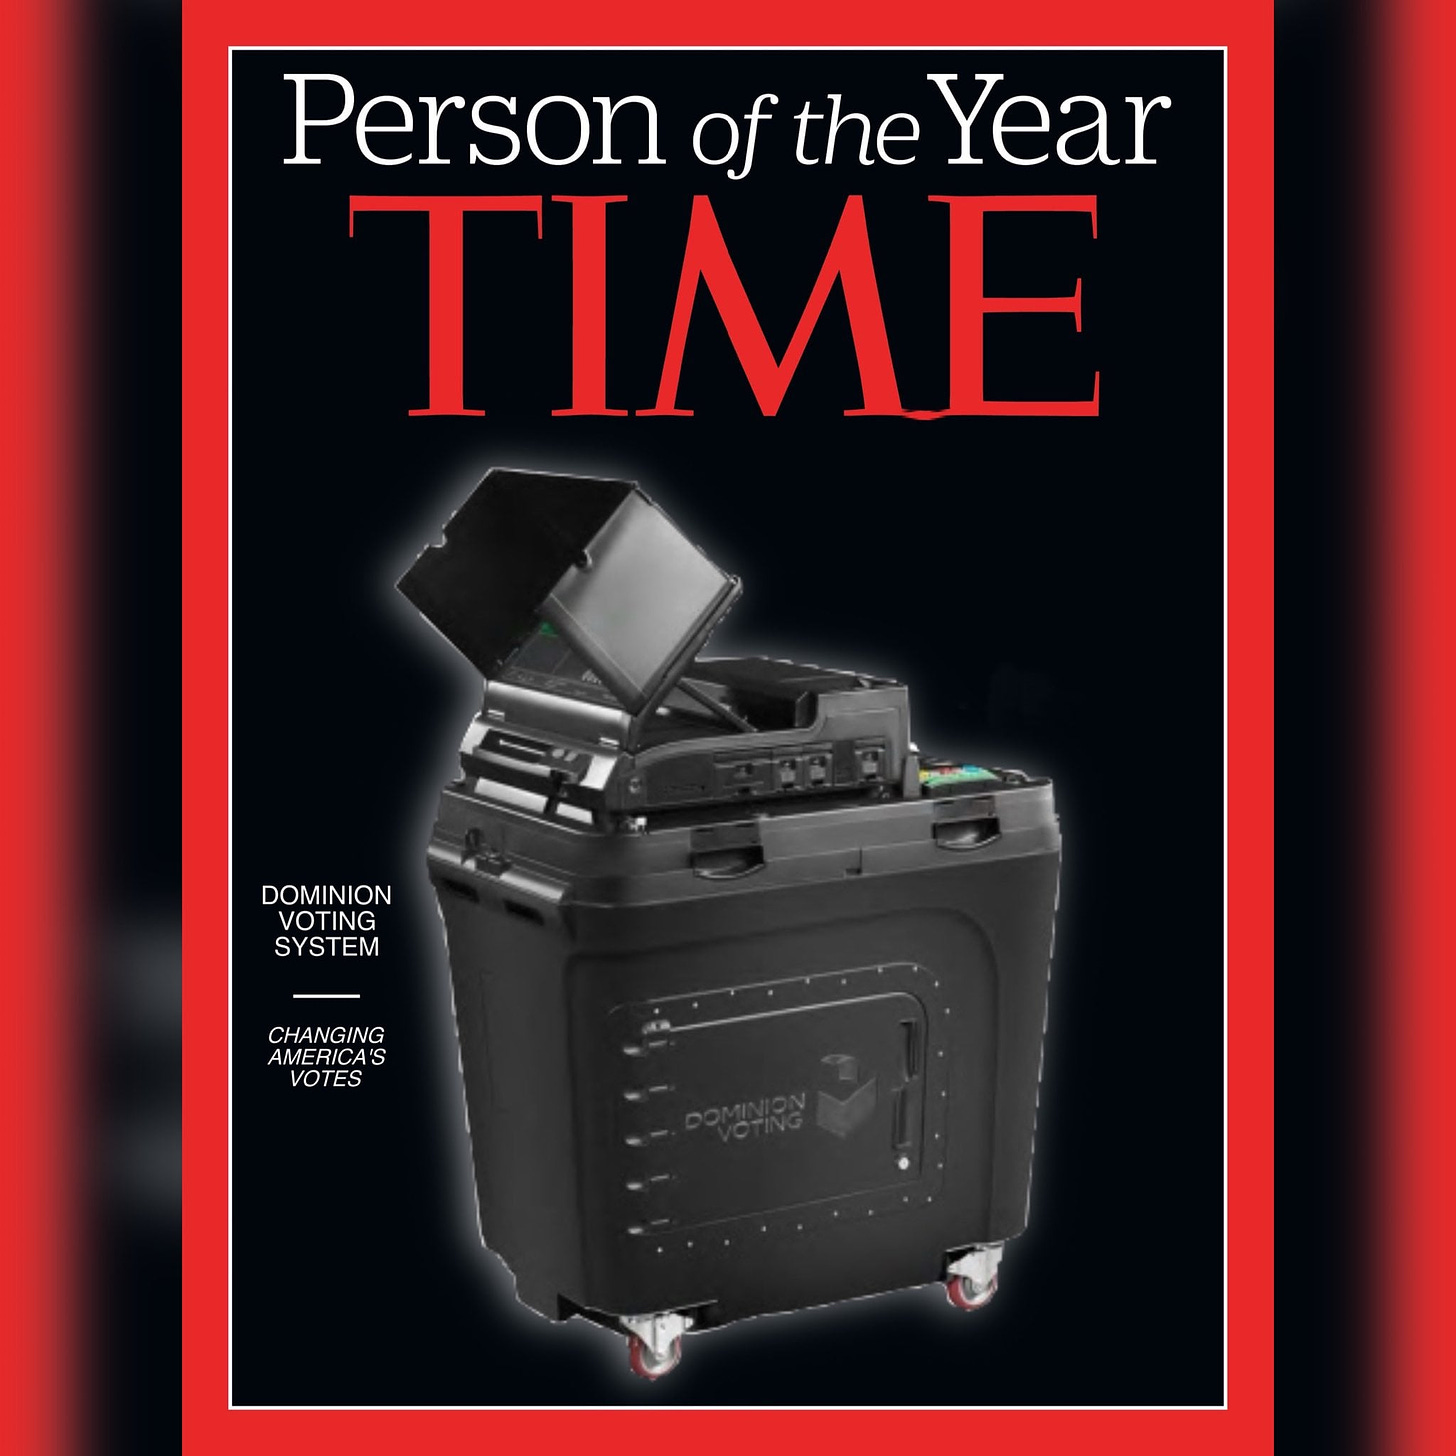 May be an image of text that says "Person of the Year TIME DOMINION VOTING TING SYSTEM CHANGING CHA AMER BICAS AMERICAS A VOTES"